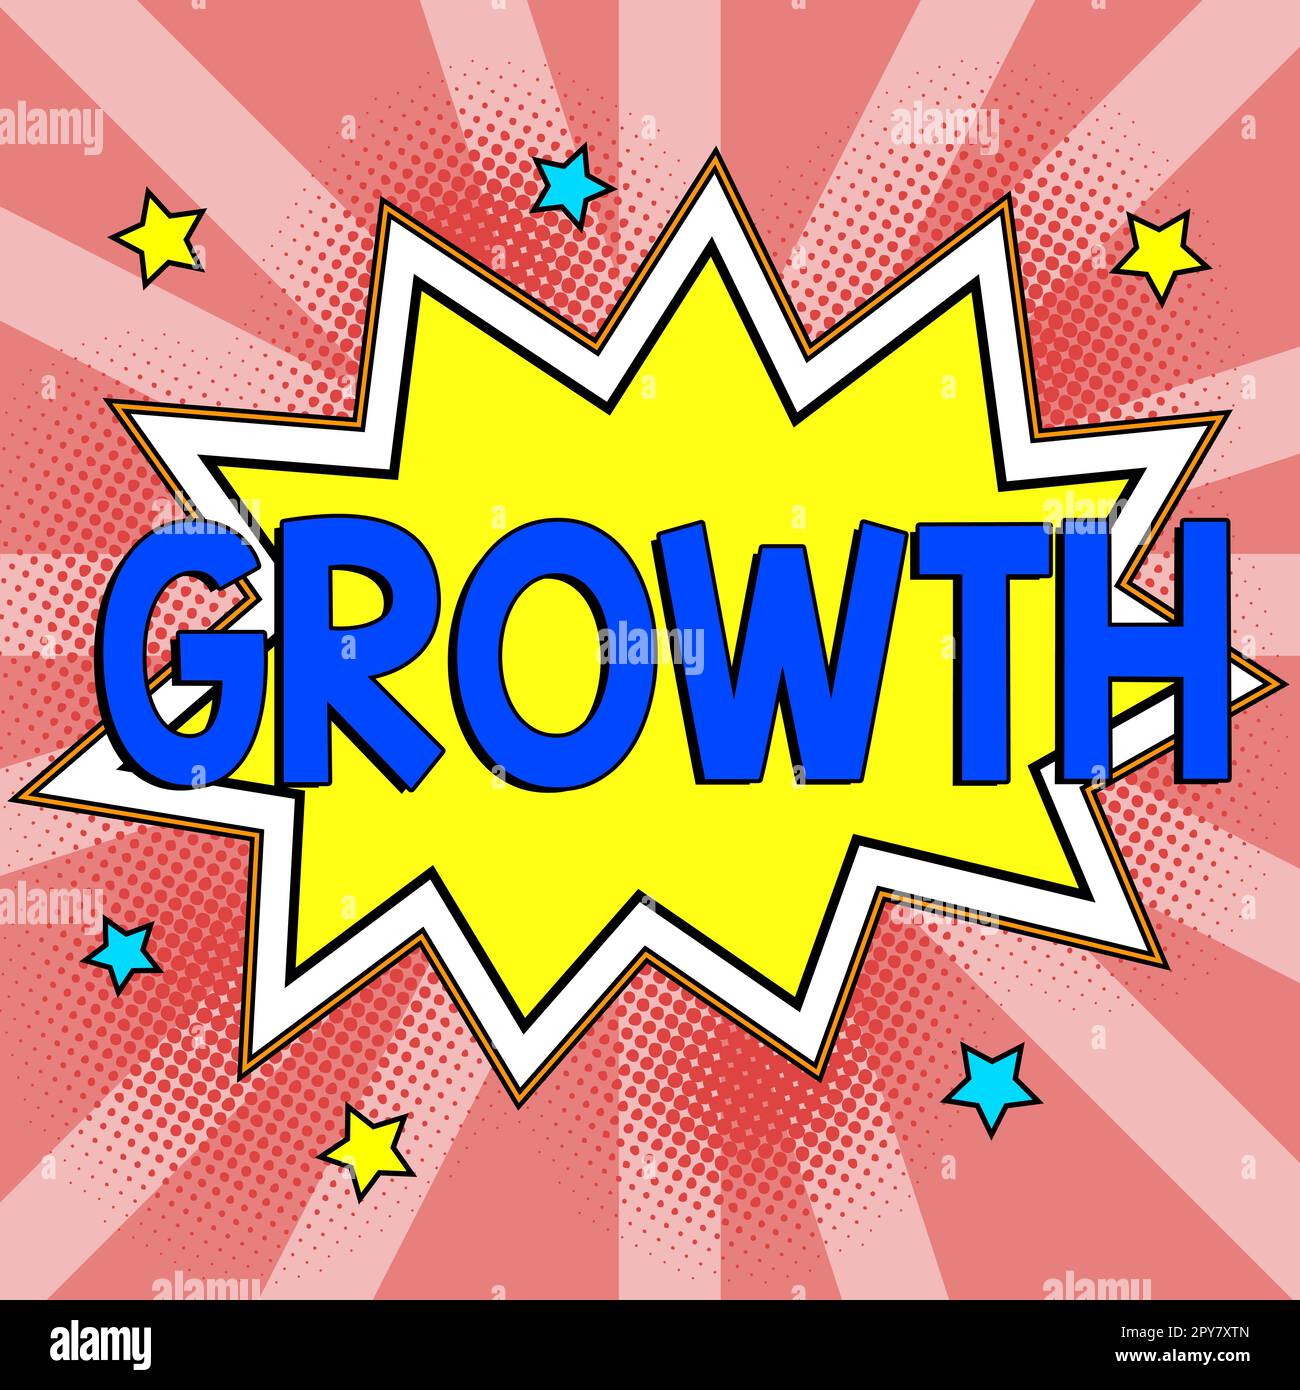 Sign displaying Growth. Word for process of increasing in size or juice Getting older Ageing Stock Photo